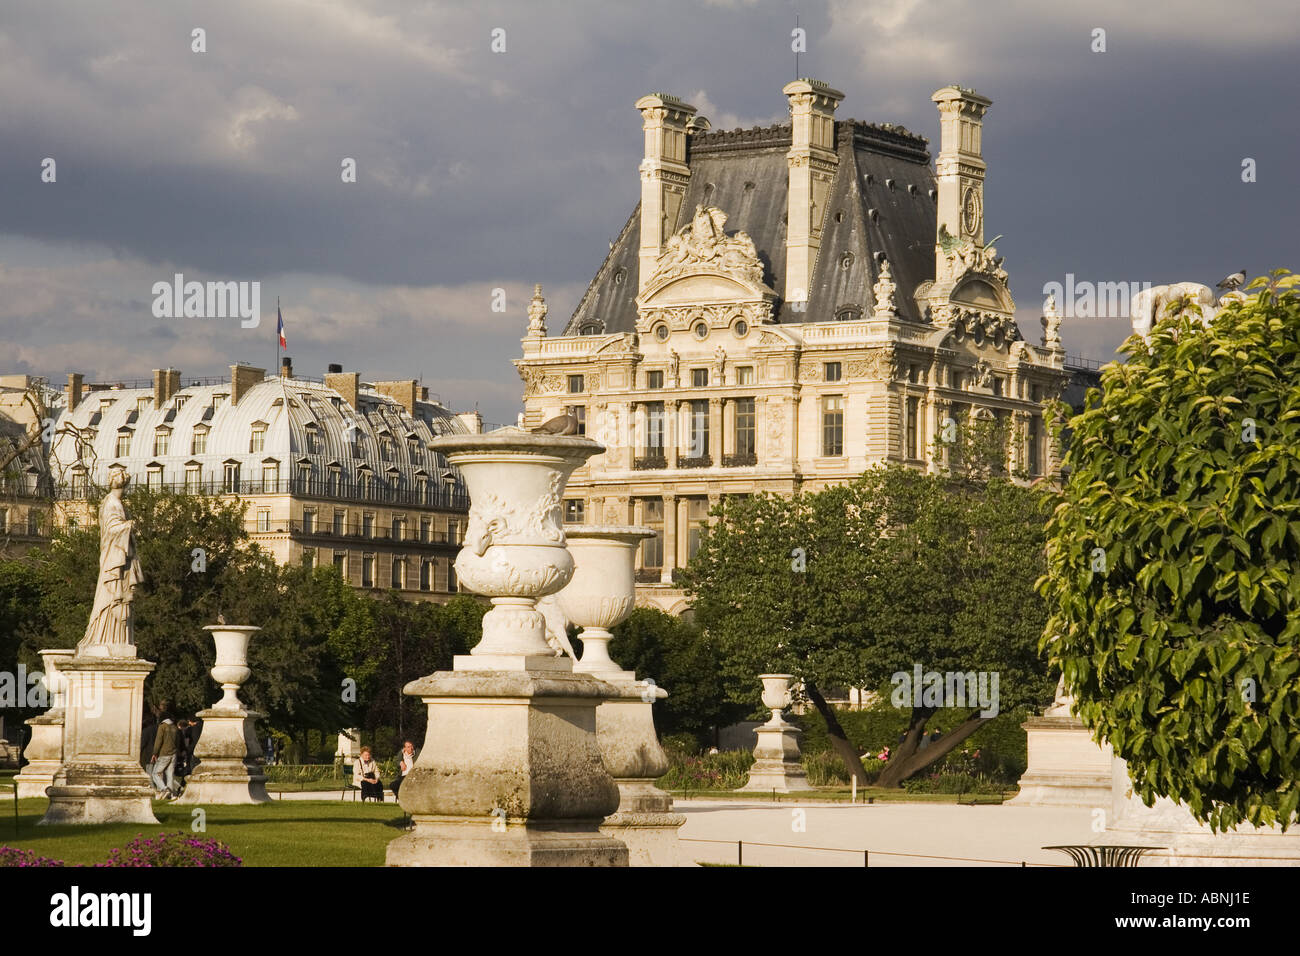 Jardin des Tuileries sculpture garden with the Musee du Louvre in back Paris France Stock Photo